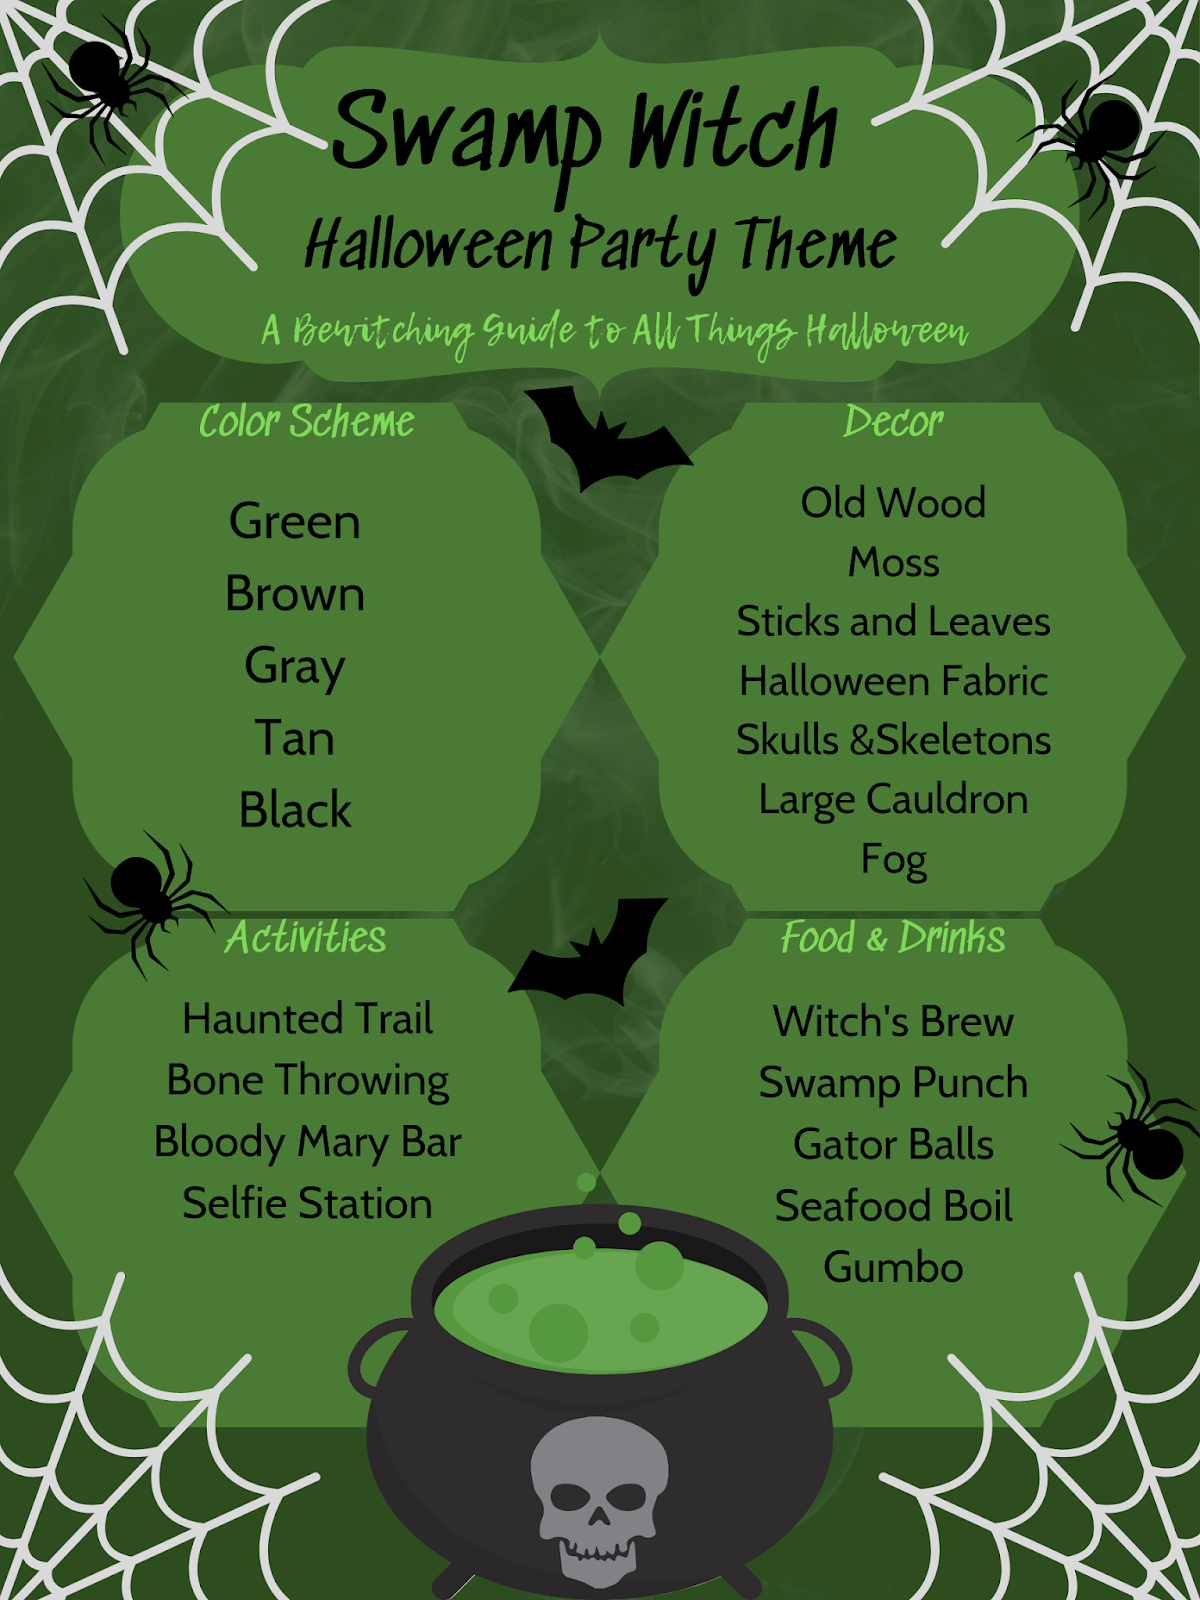 A Bewitching Guide to Halloween: Swamp Witch Halloween Party Theme  #SwampWitch #HalloweenParty #PartyTheme #HauntedTrail